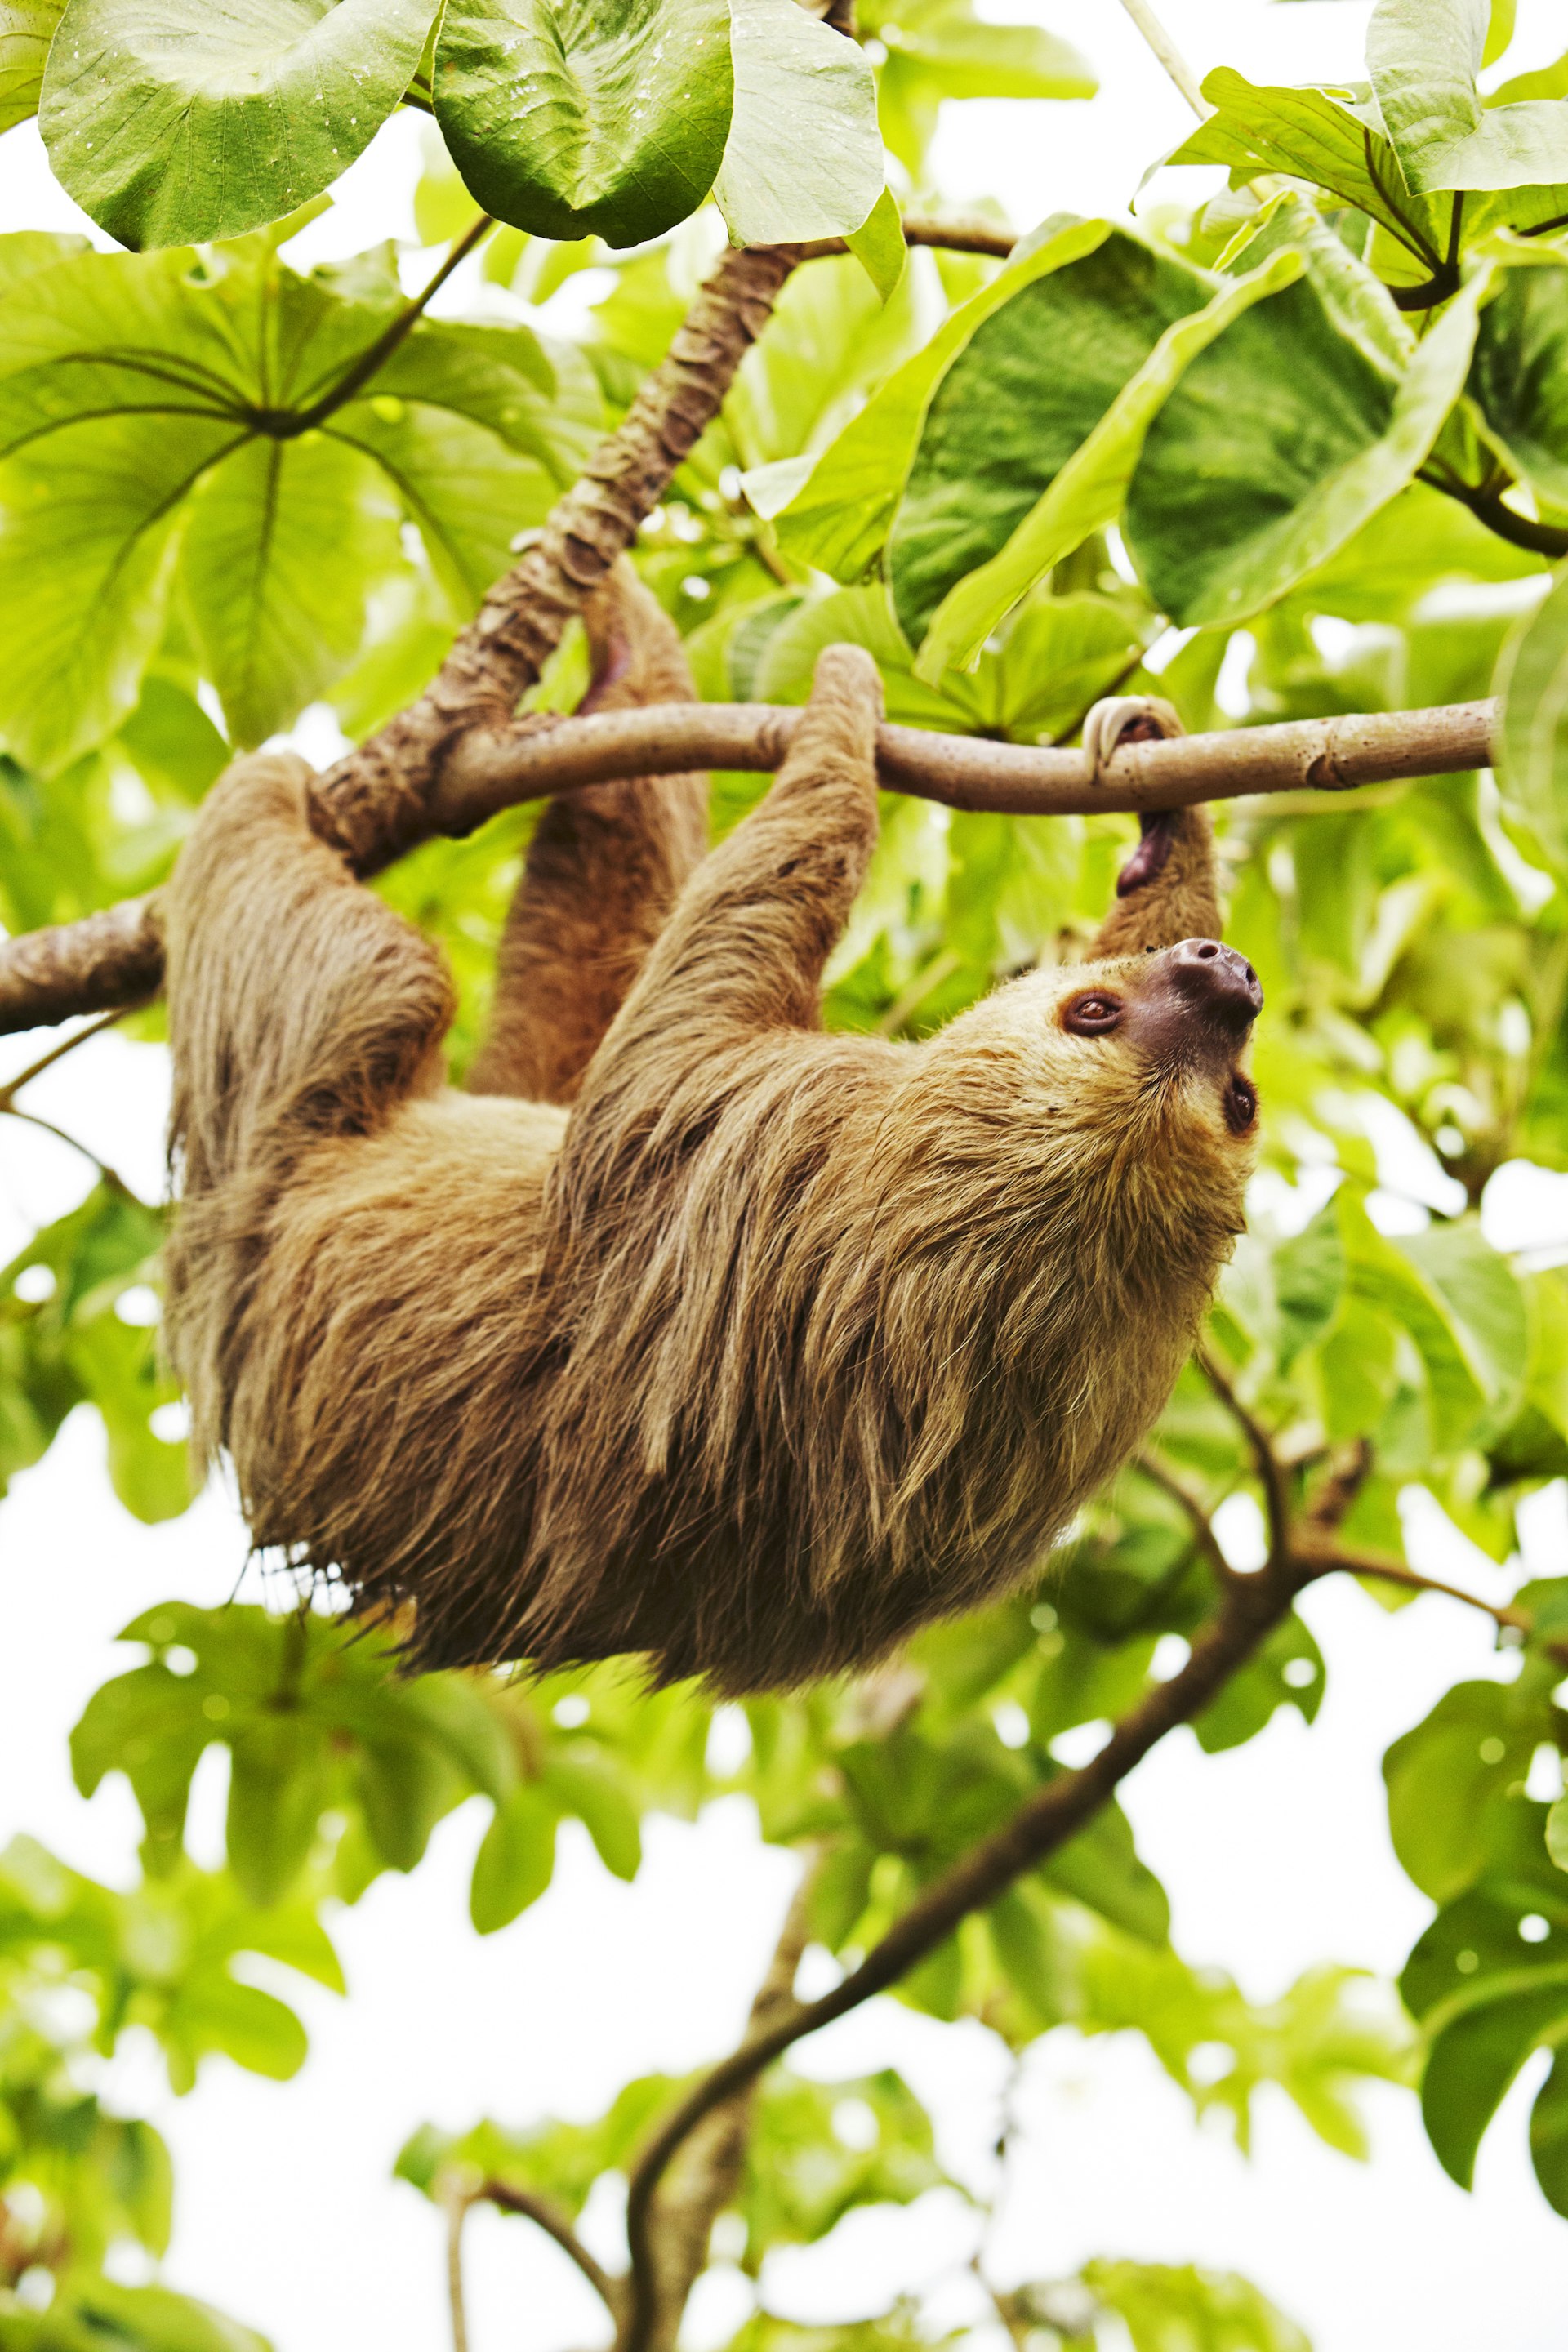 A two-toed sloth hanging from a tree